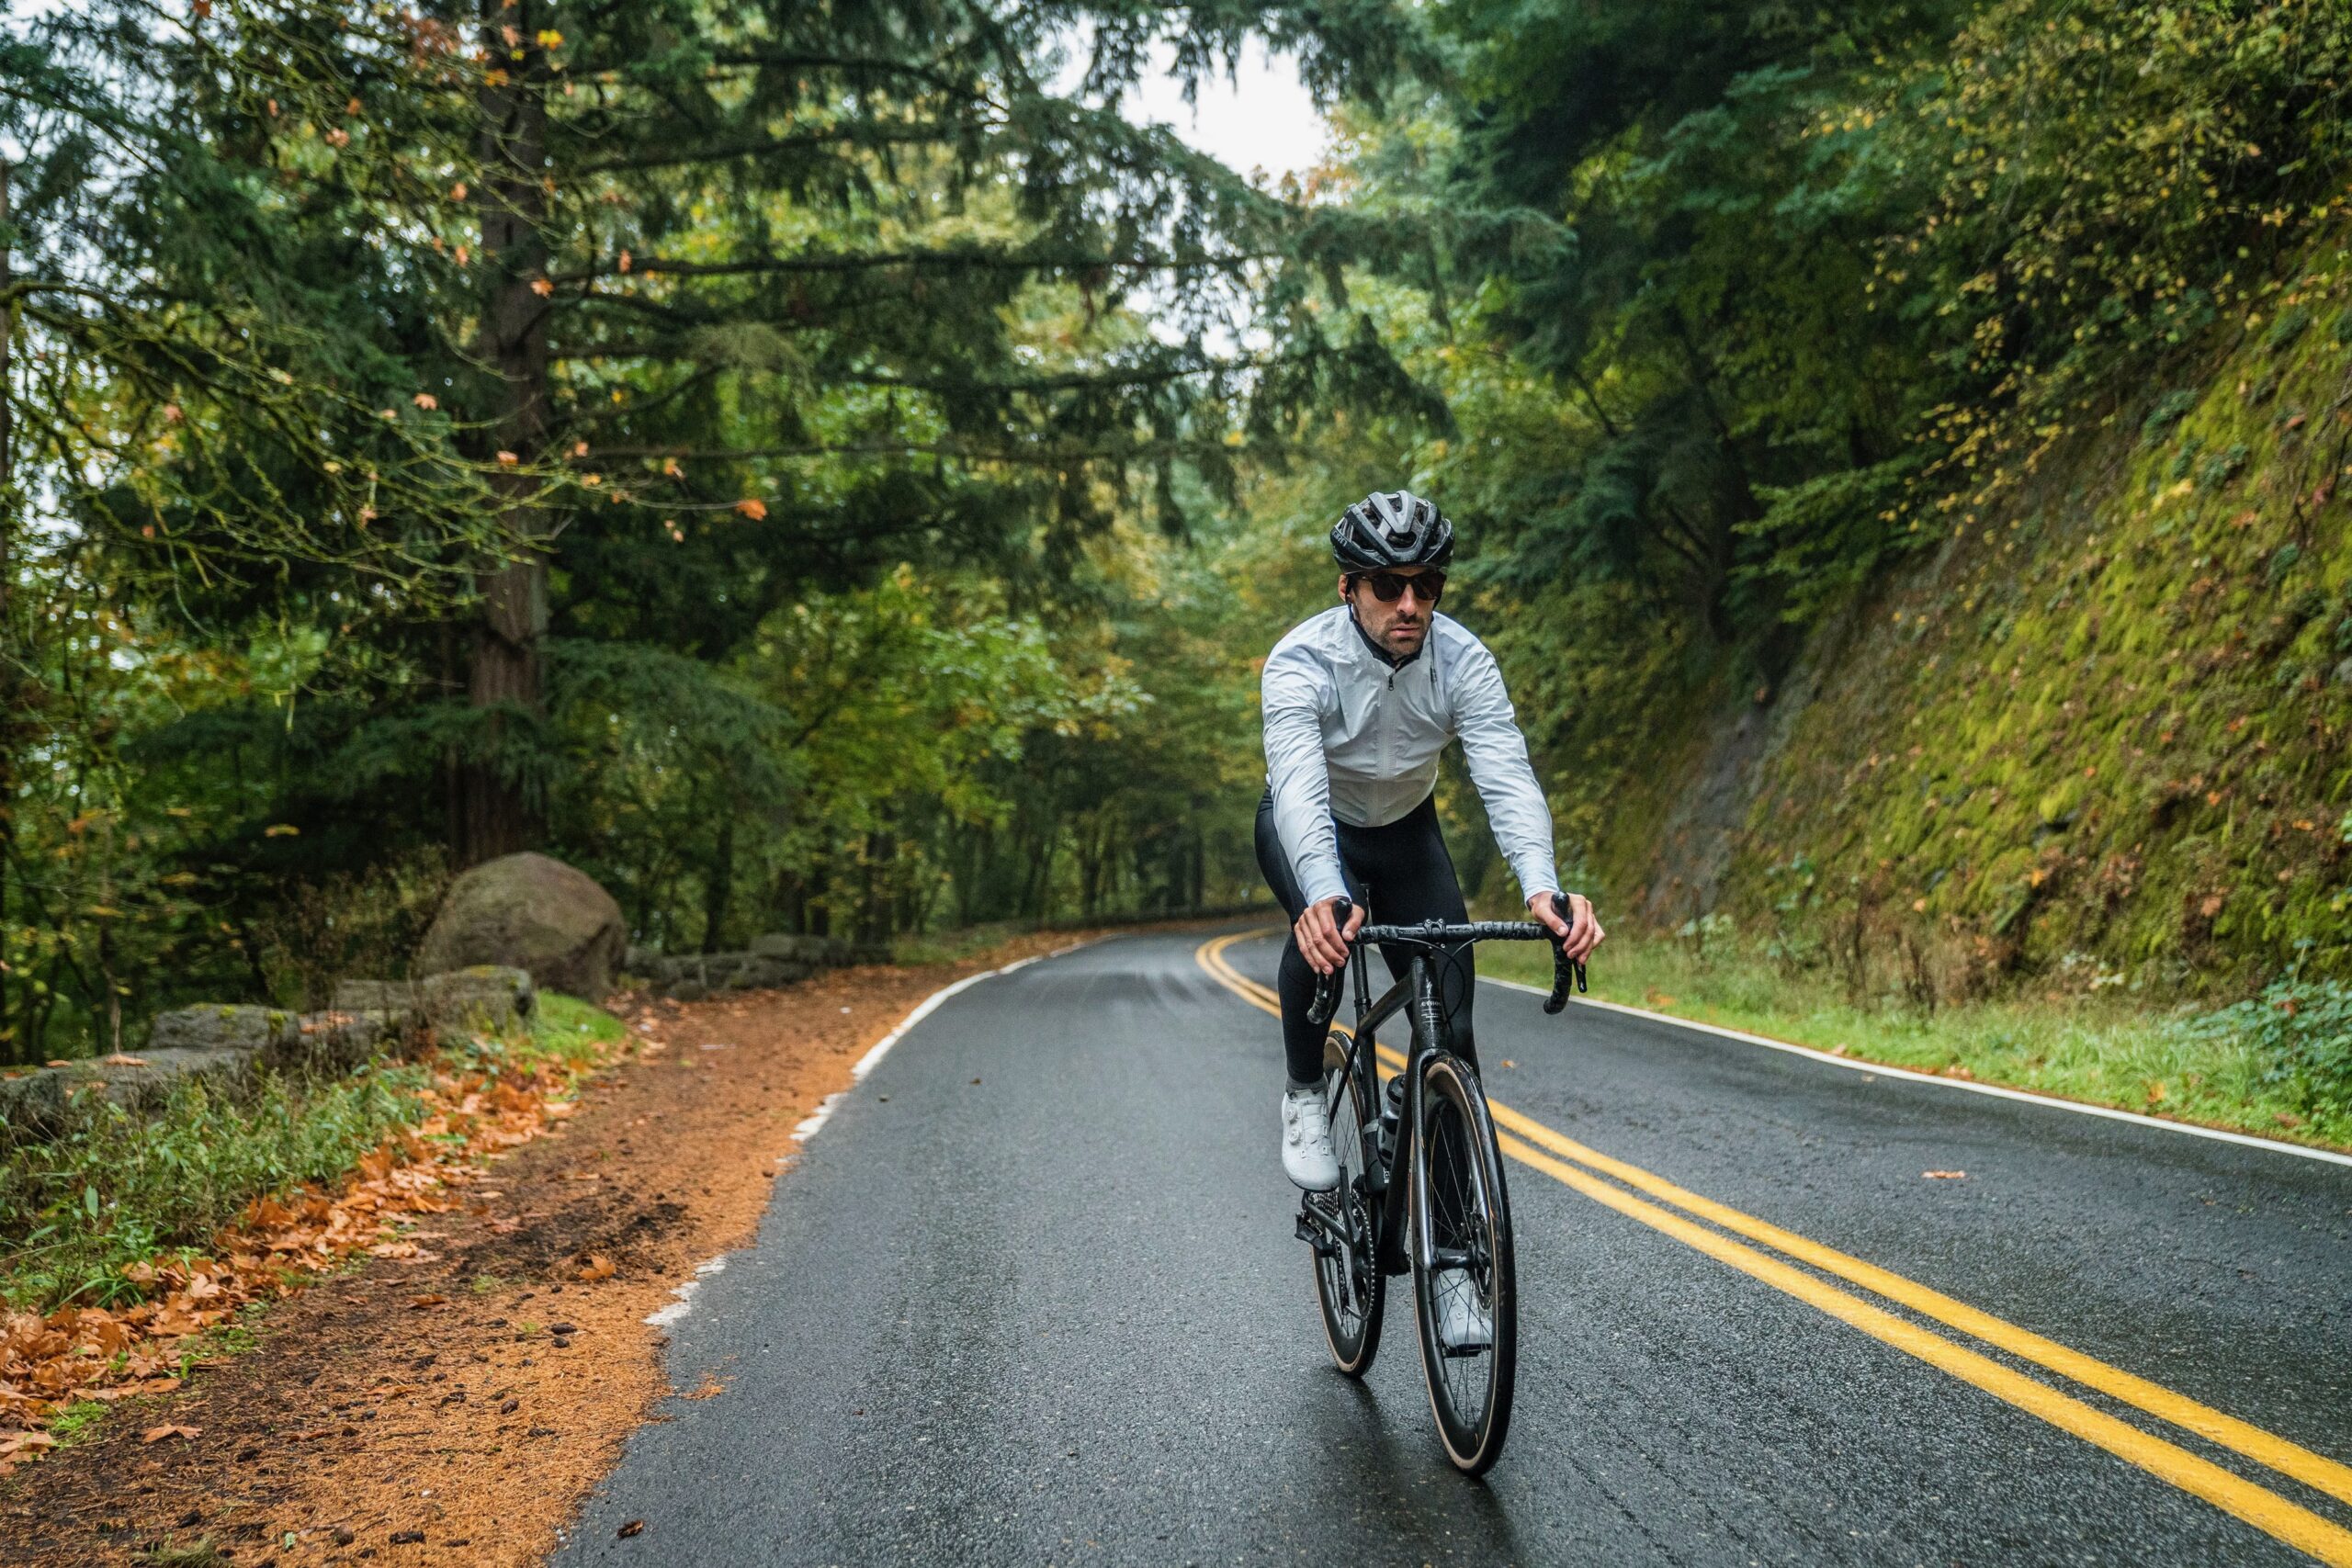 Riding in bib tights on a wet road